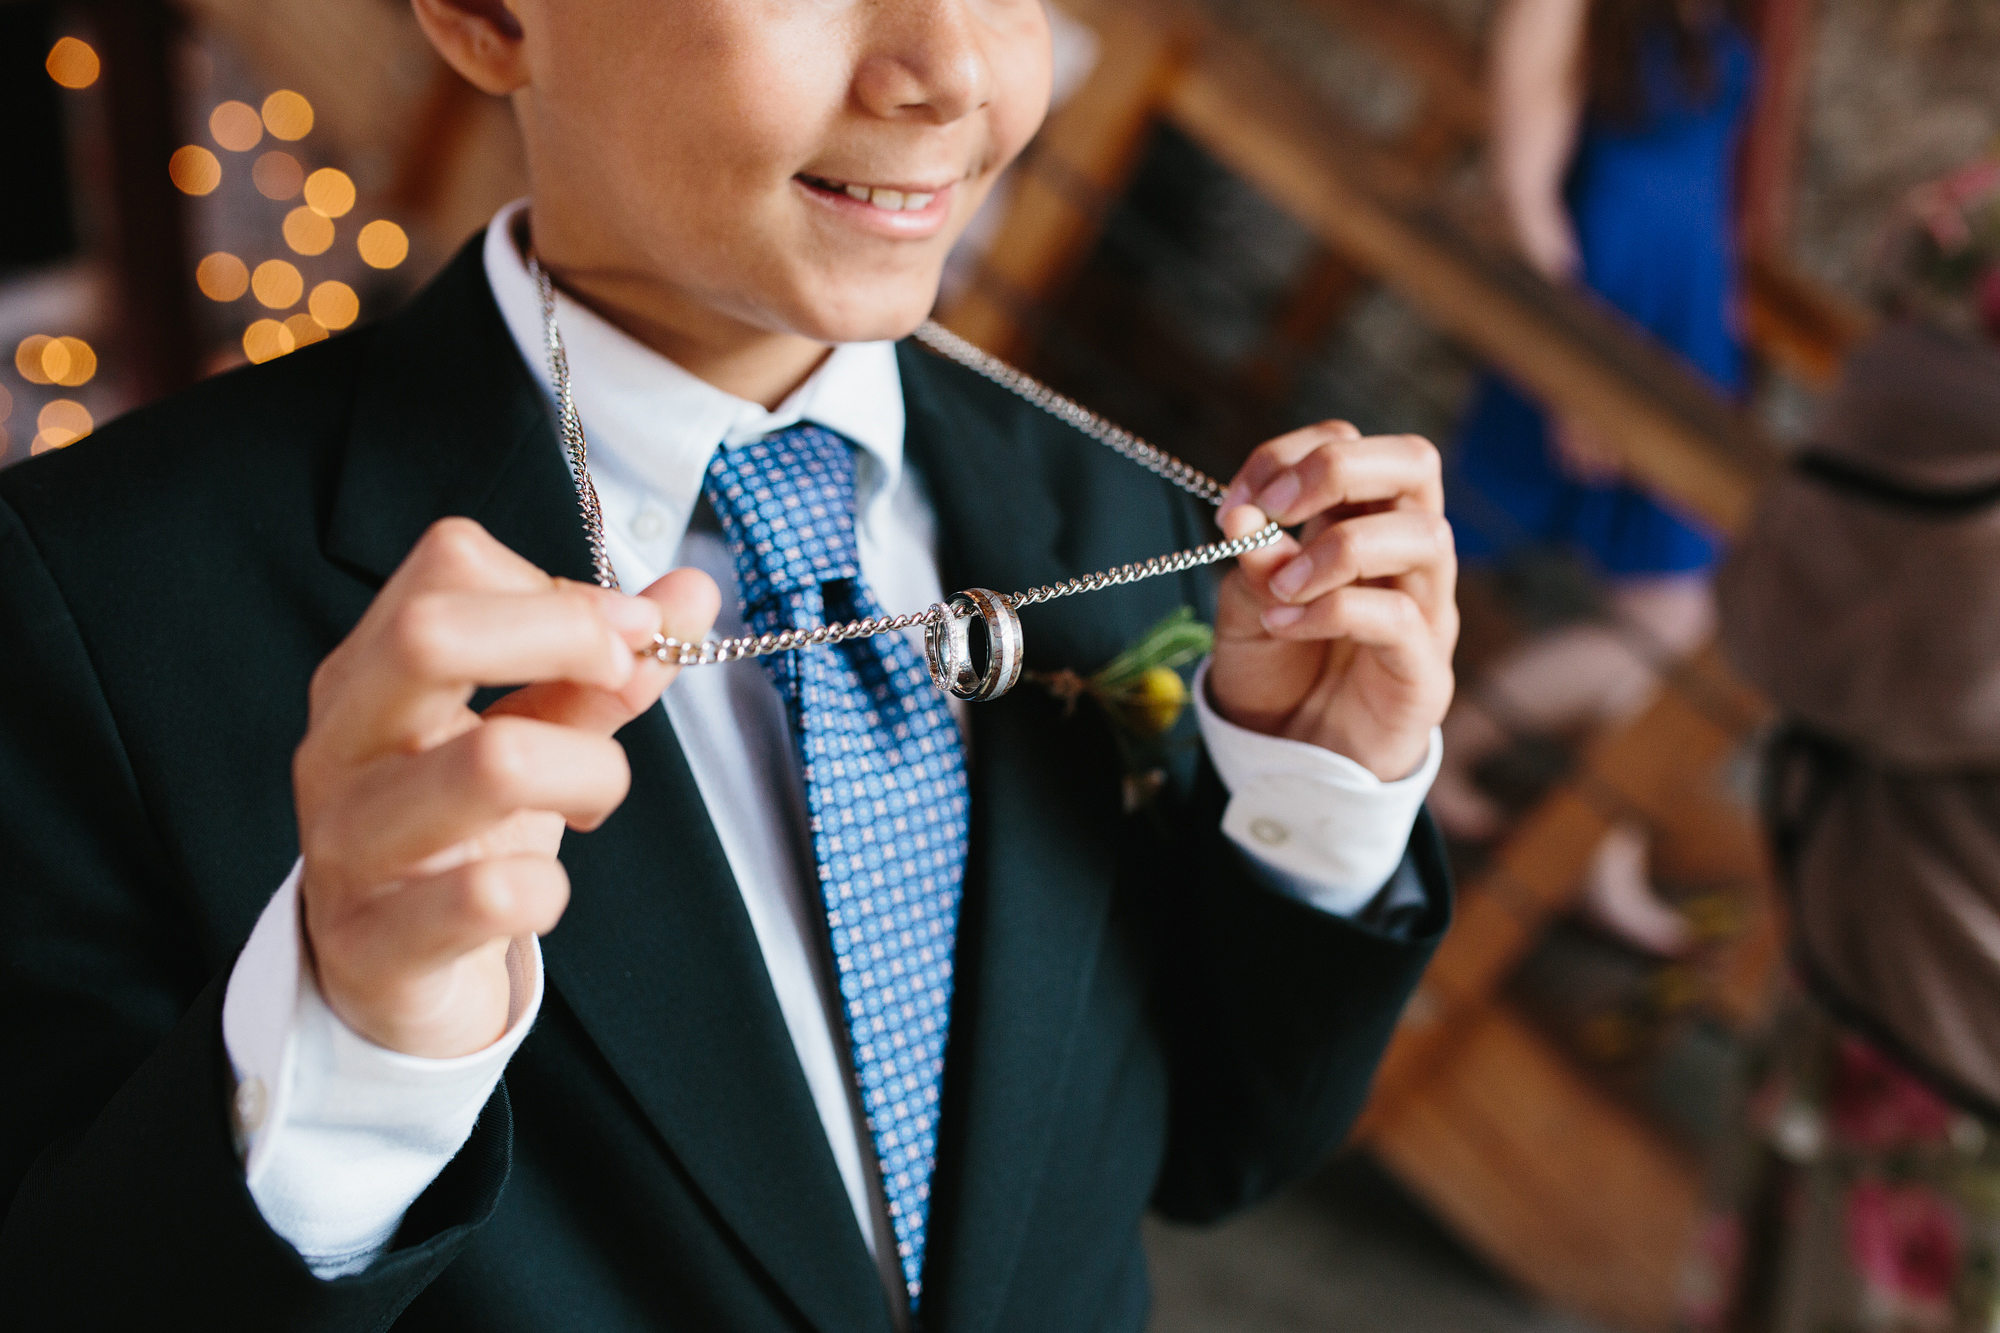 This is a great idea for ring security while the ring bearer has the rings.